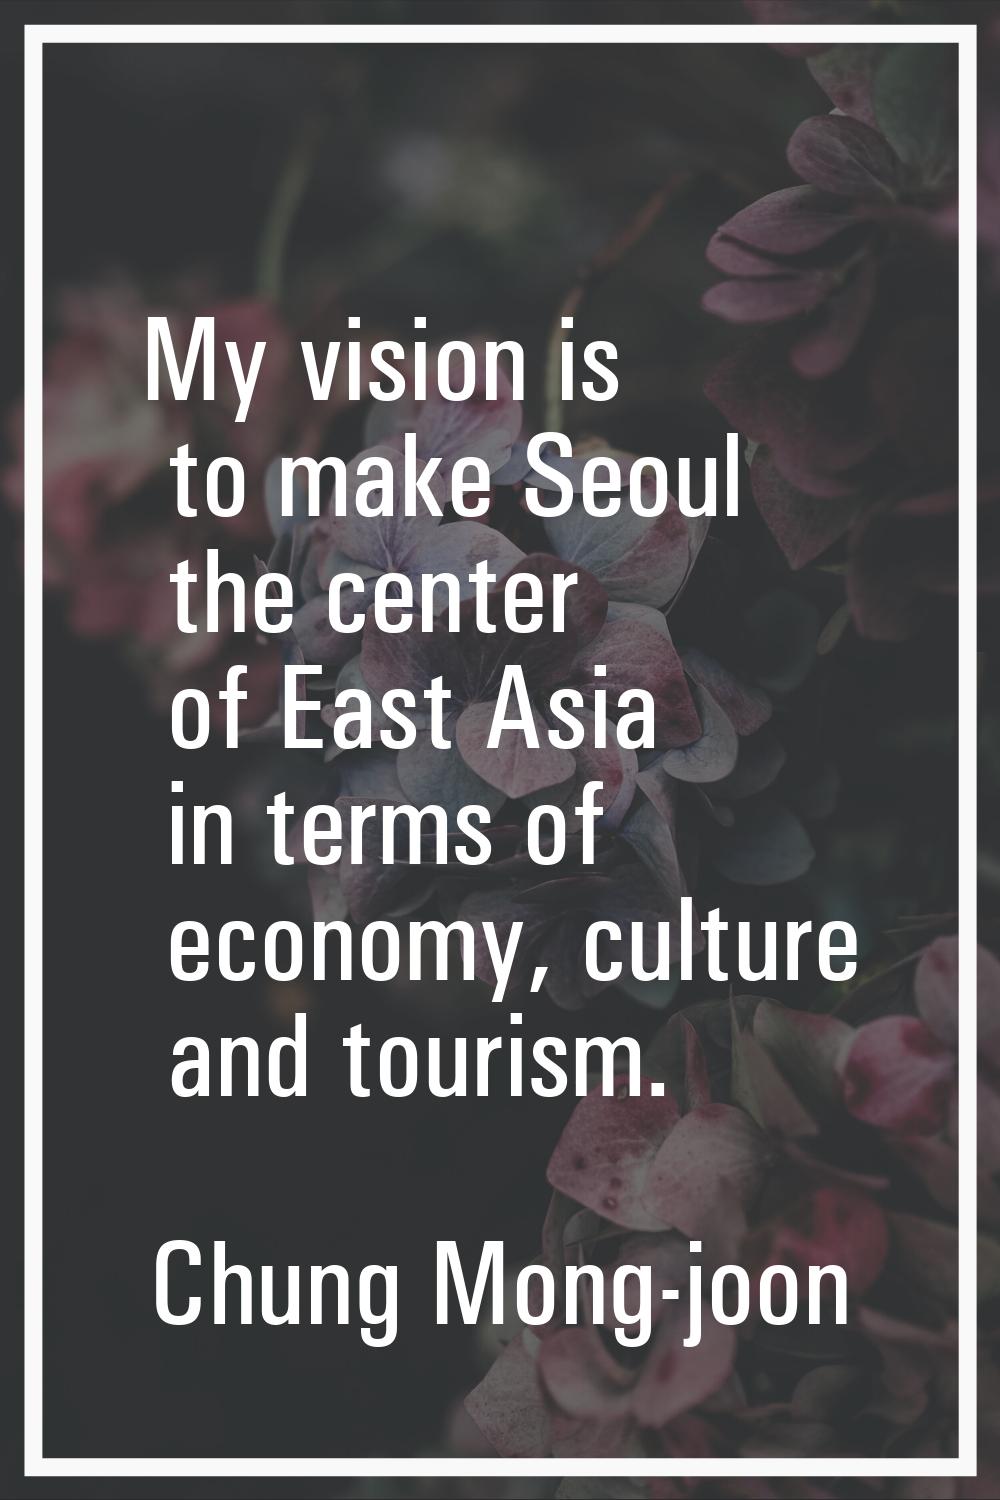 My vision is to make Seoul the center of East Asia in terms of economy, culture and tourism.